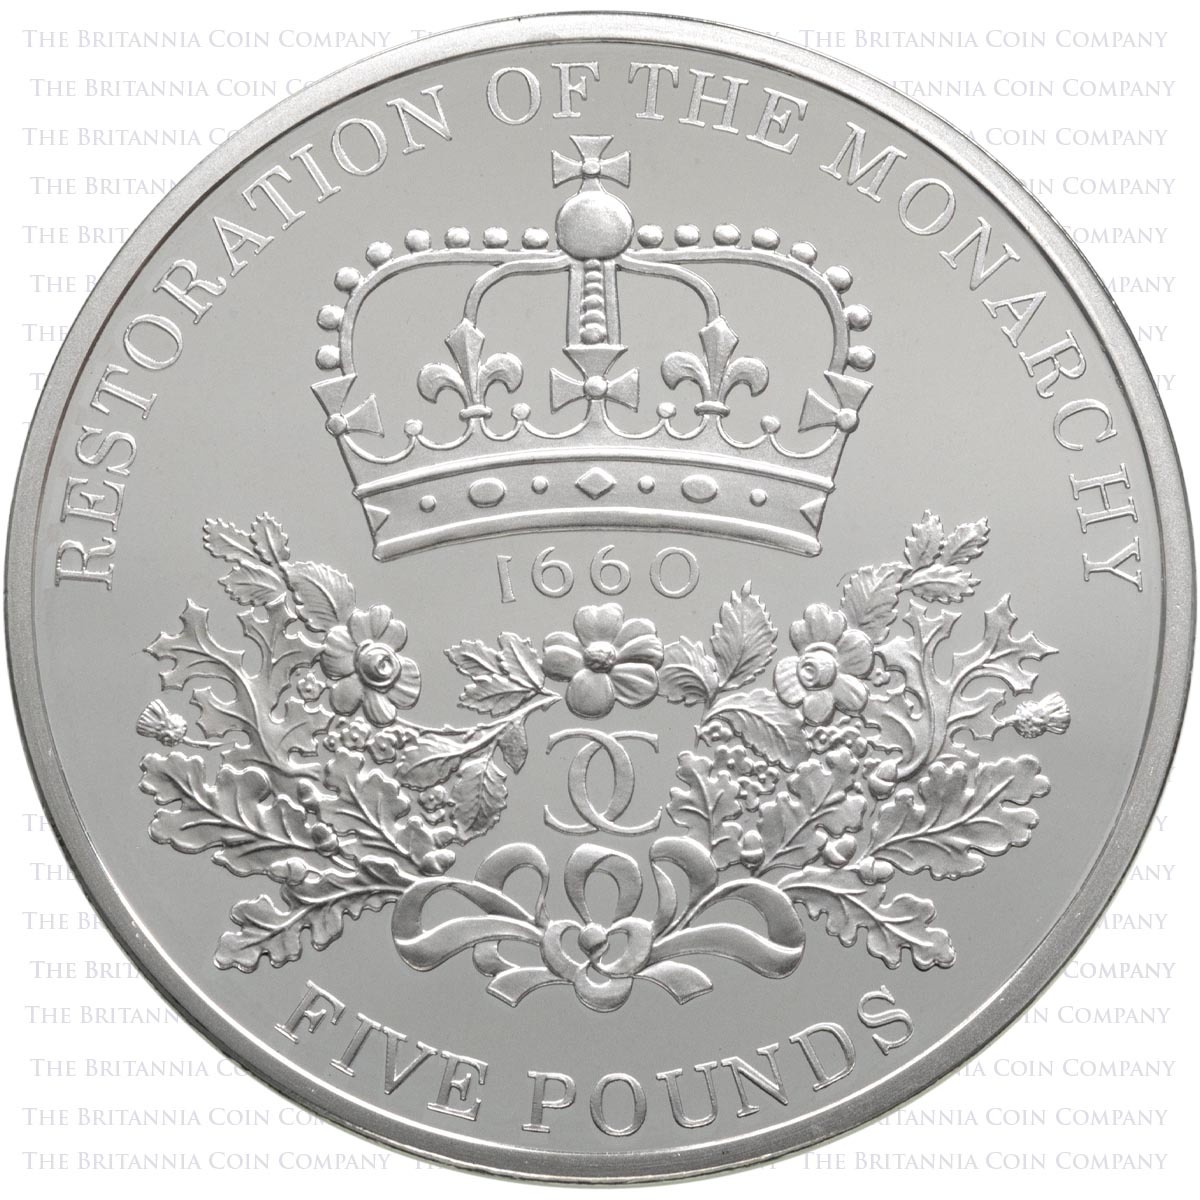 UKRMPF 2010 Restoration Of The Monarchy 1660 Five Pound Crown Piedfort Silver Proof Coin Reverse